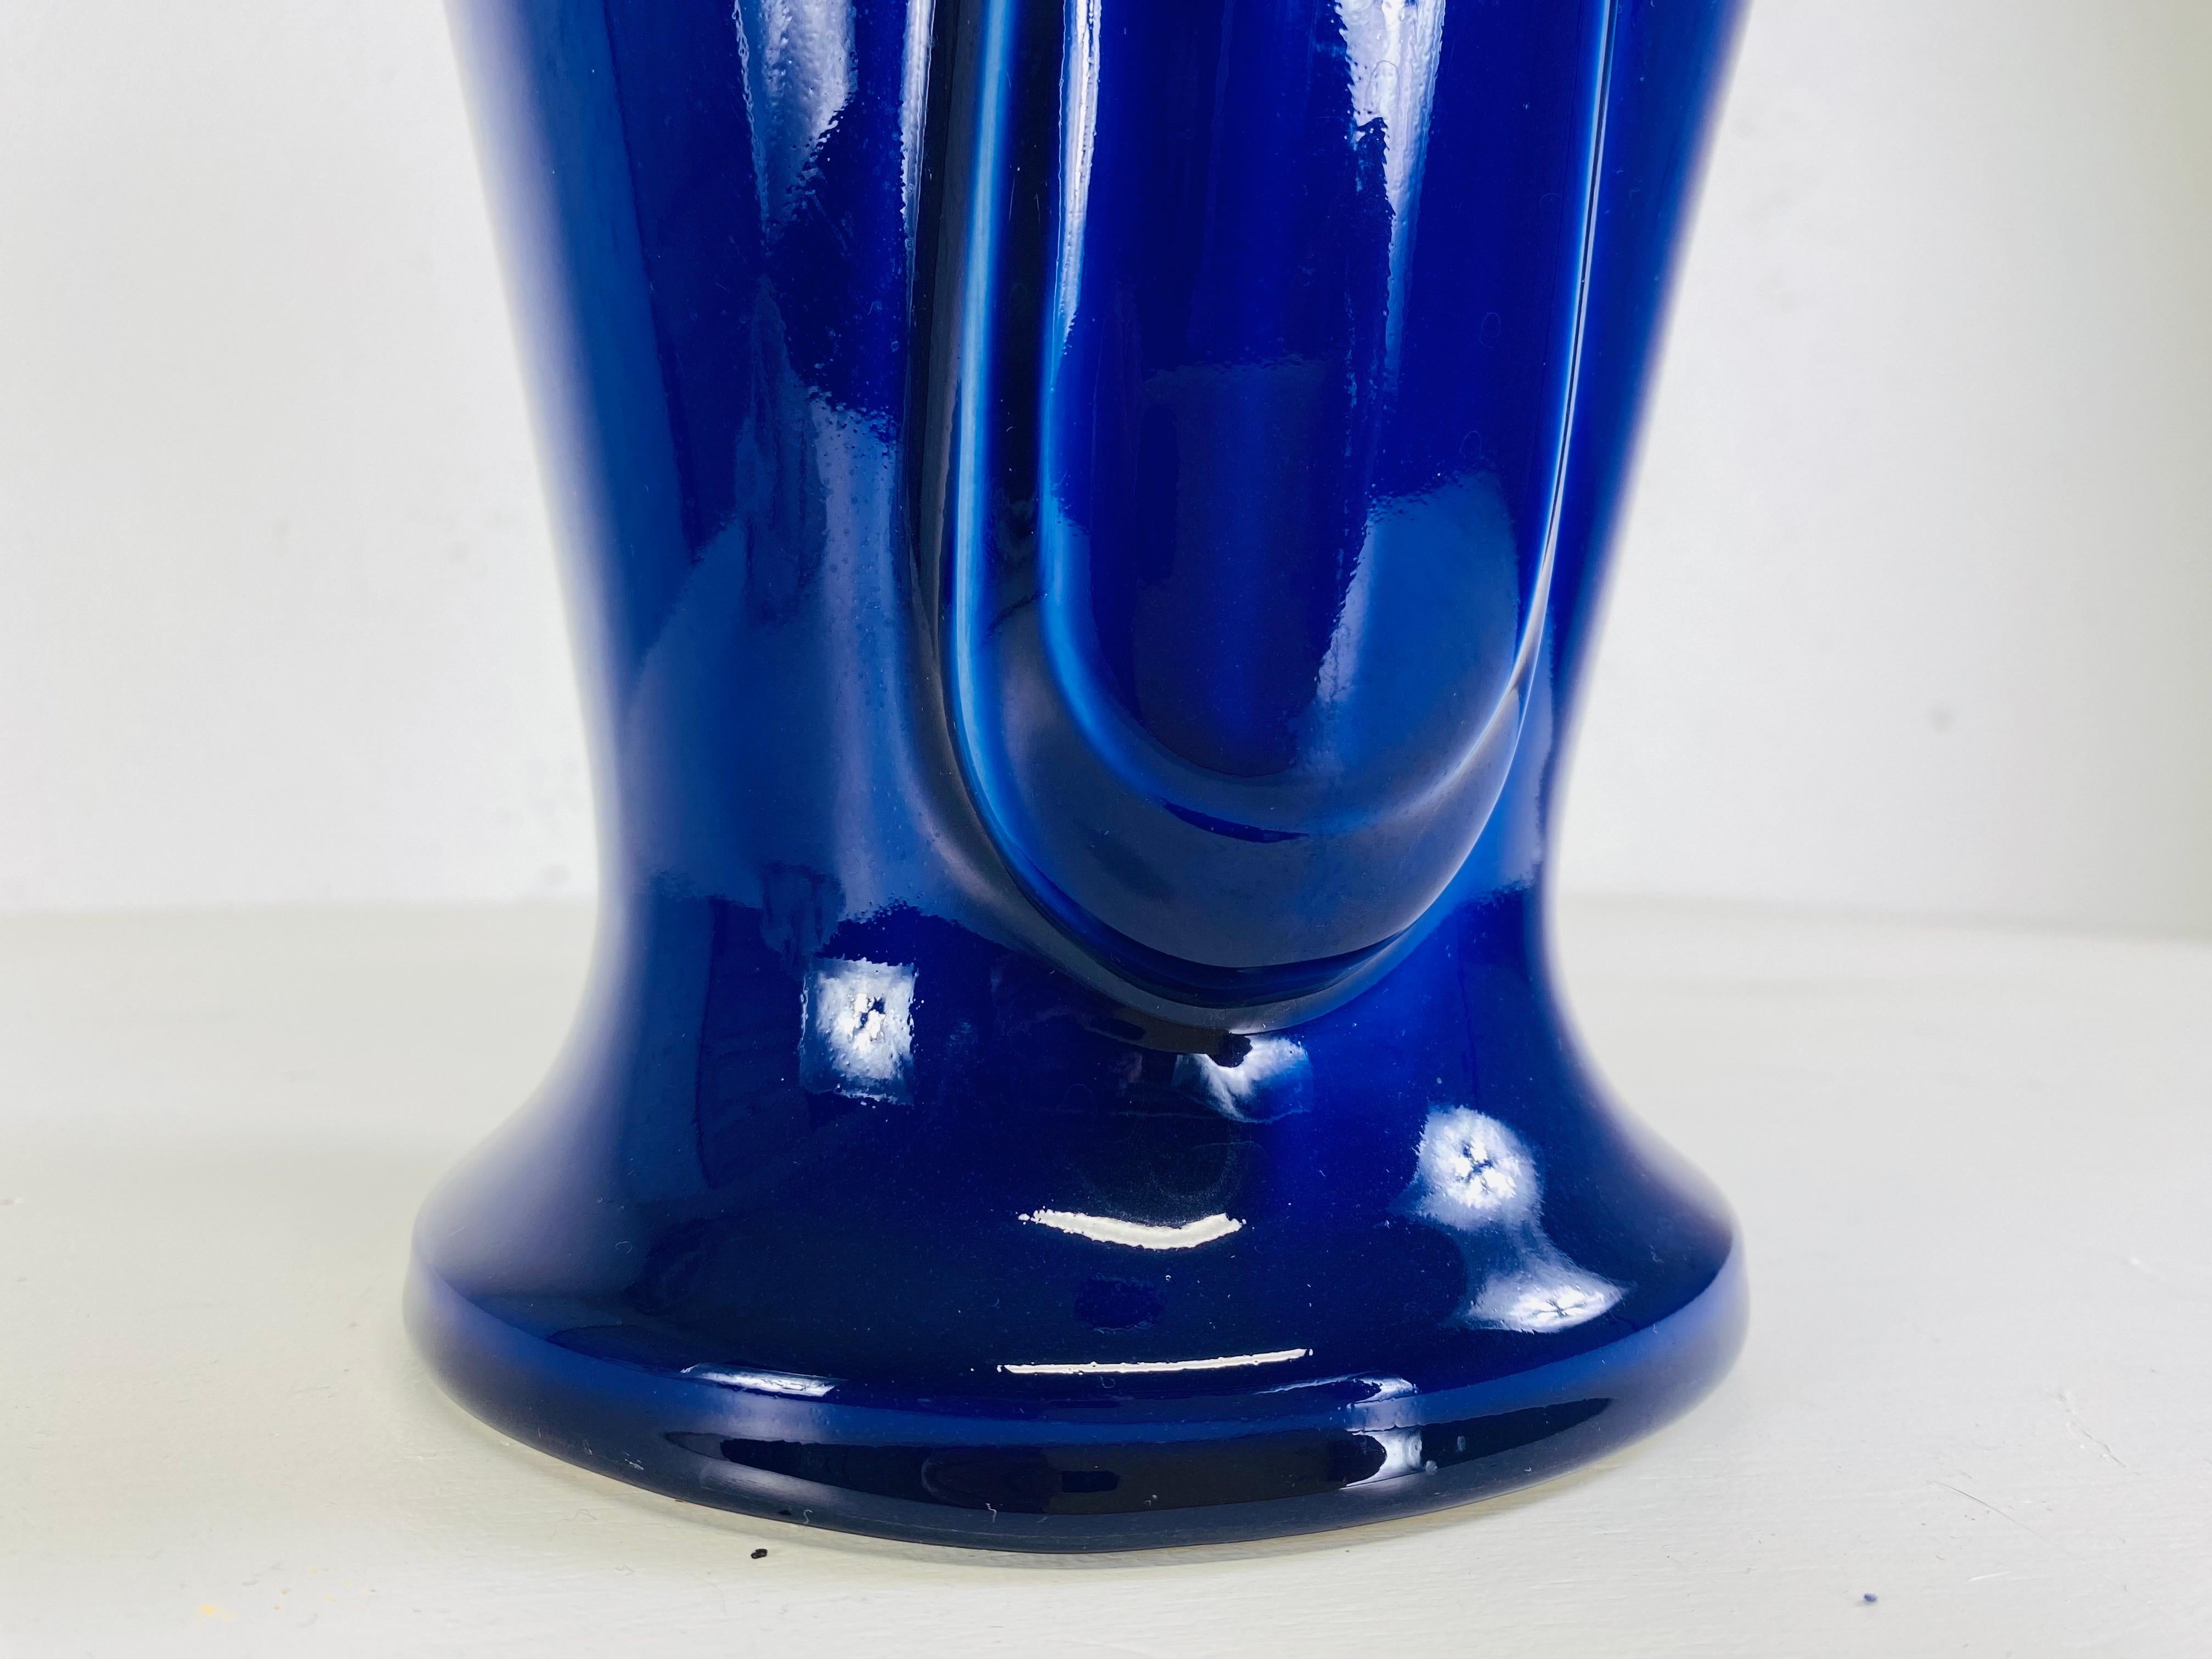 This is a 20th century vintage dynamic cobalt blue art deco style vase. This intense cobalt blue vase has two beautiful scrolls handles on either side of the vase. This Cobalt blue vase was made in America circa 1980.